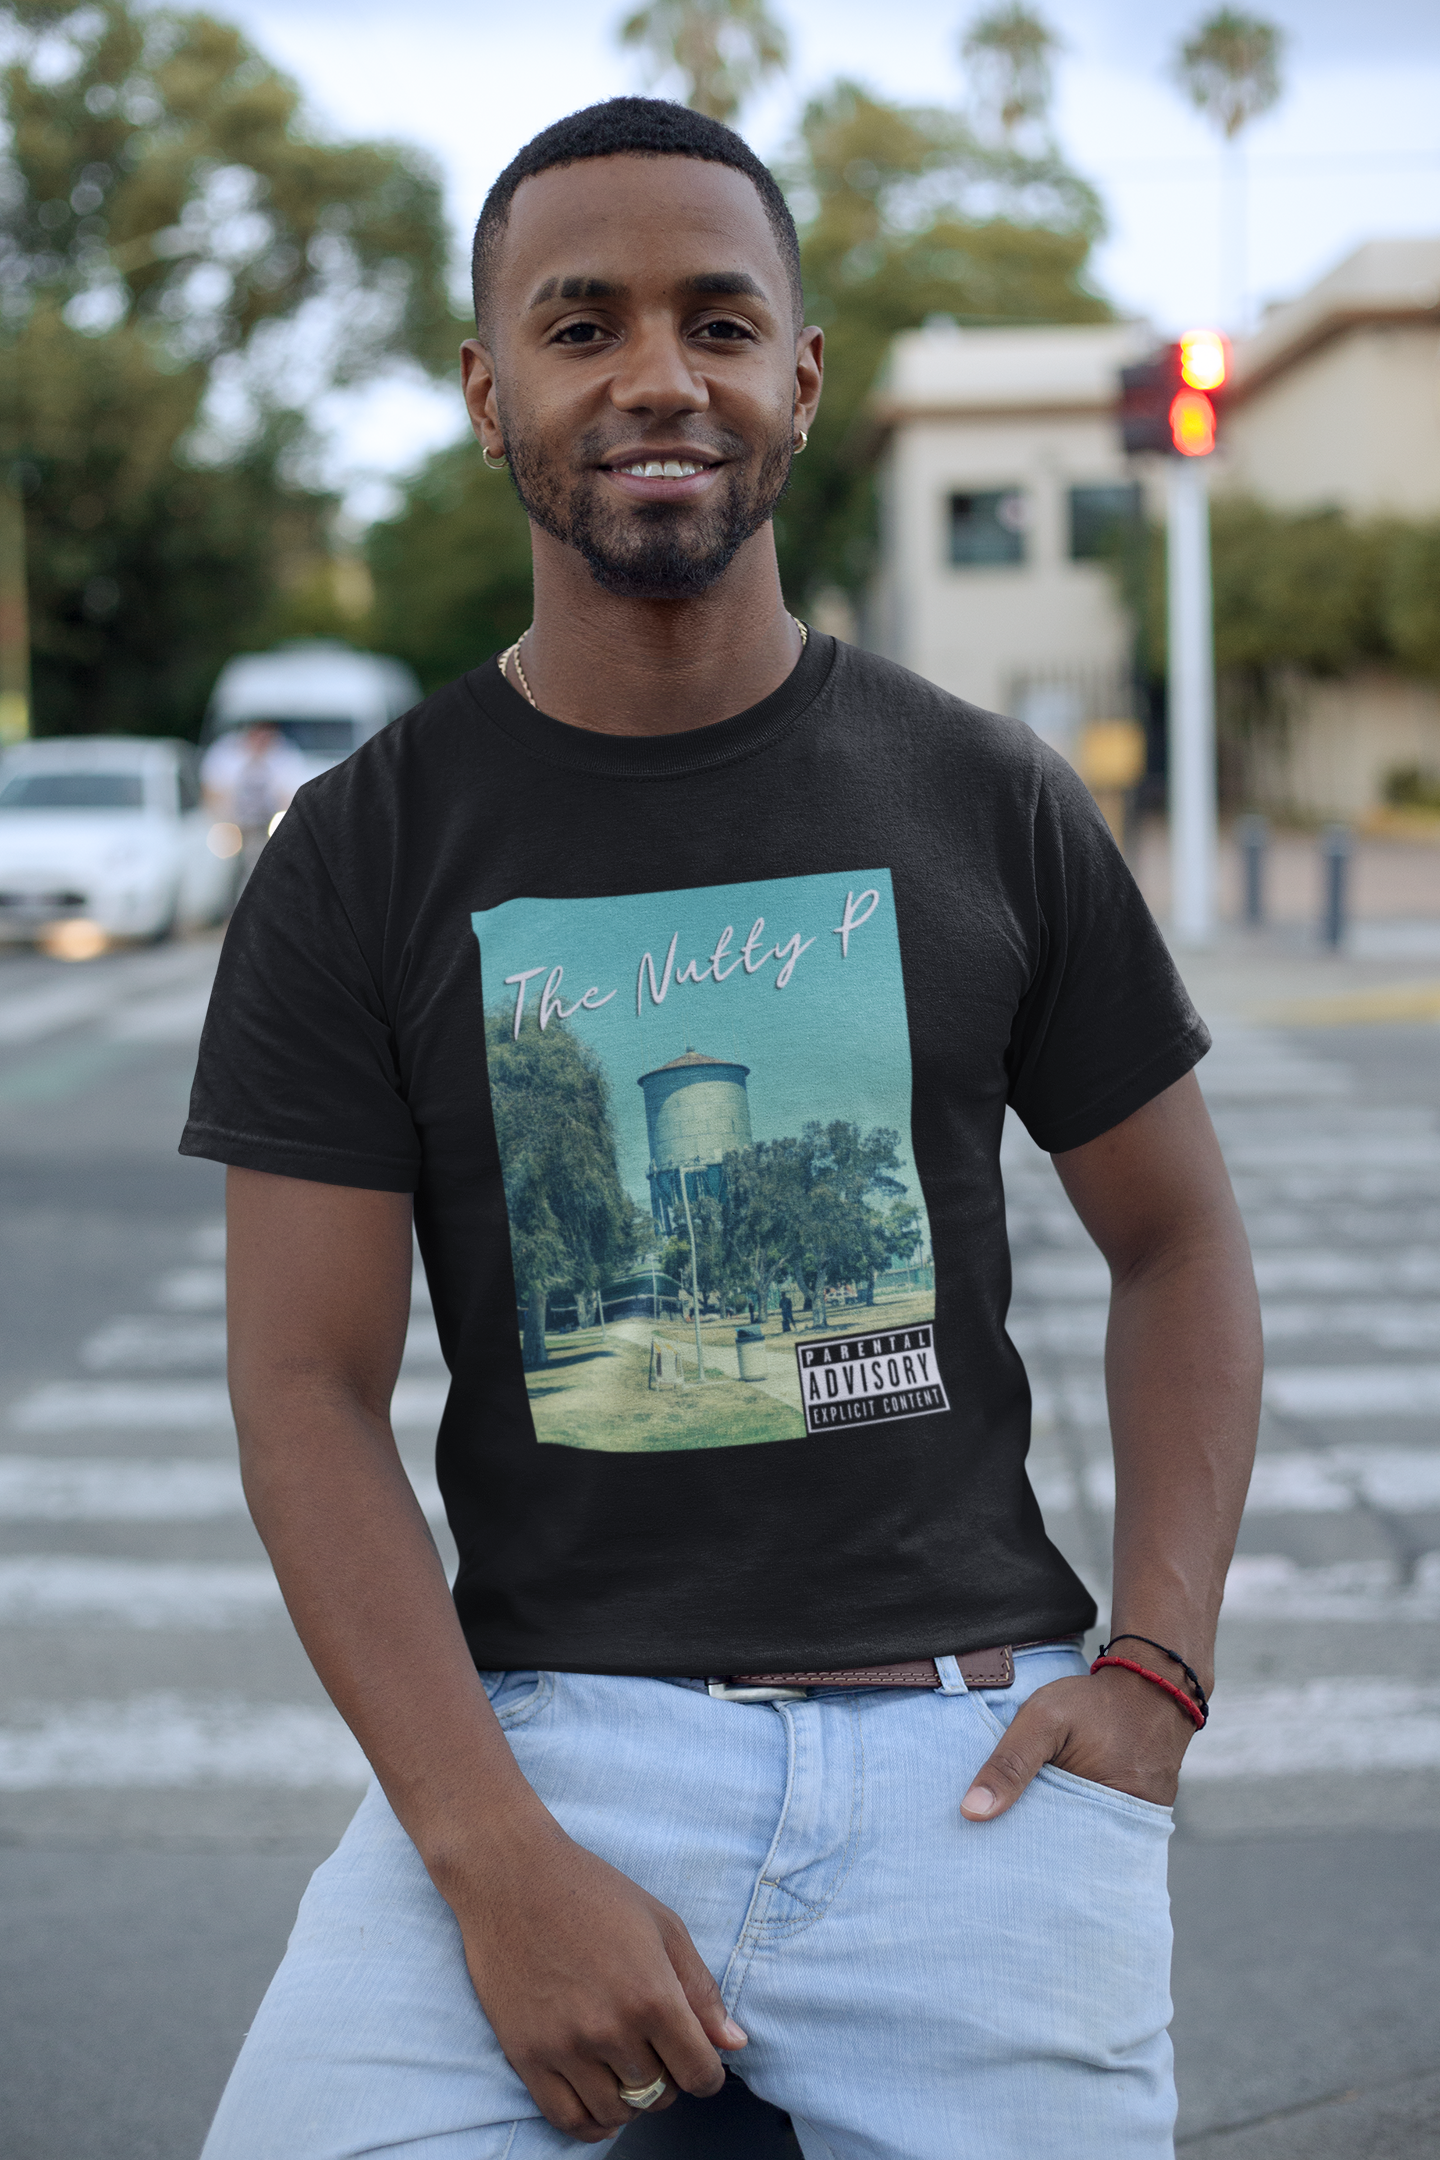 Cool guy standing on street corner wearing North Park Water Tower T-shirt